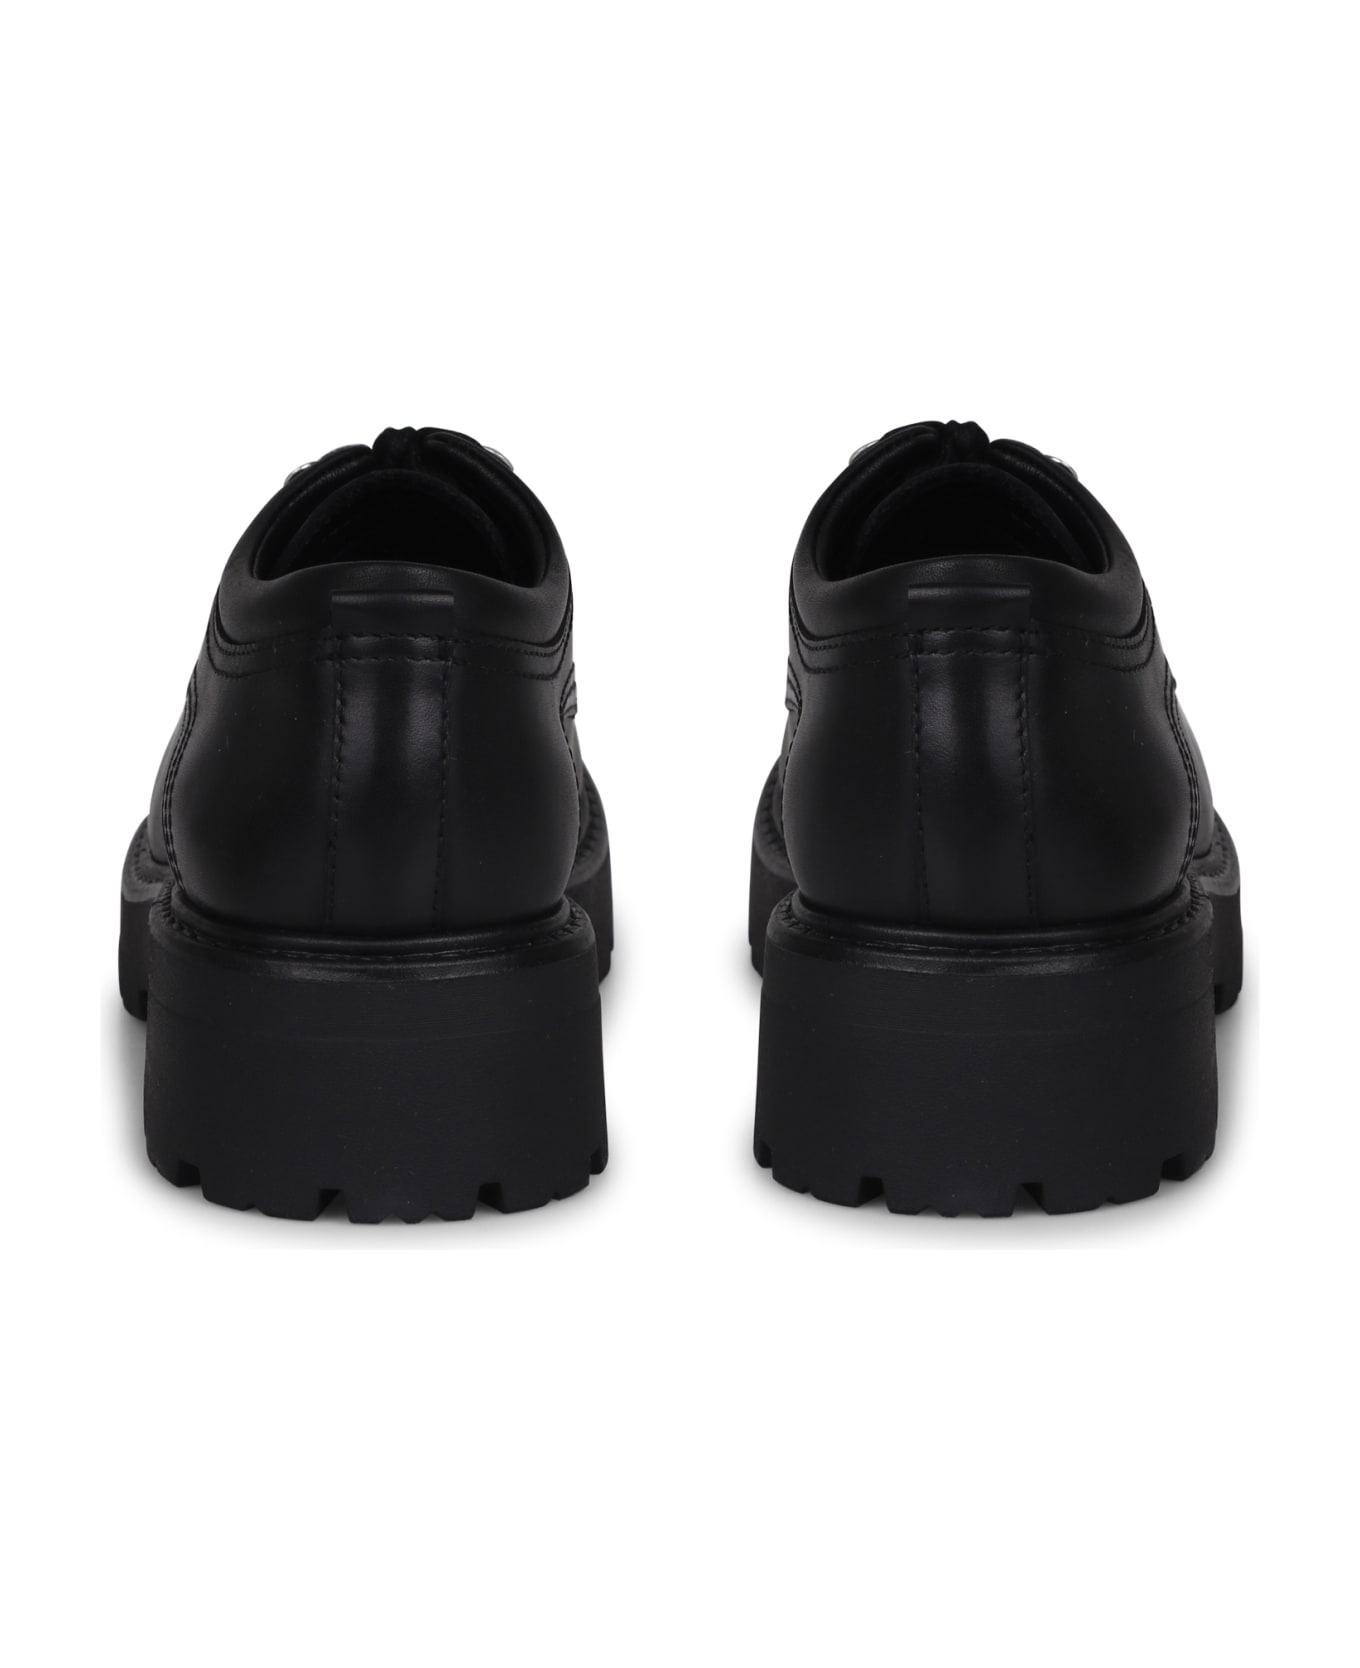 Vagabond Cosmo 2.0 Lace-up Fastening Shoes